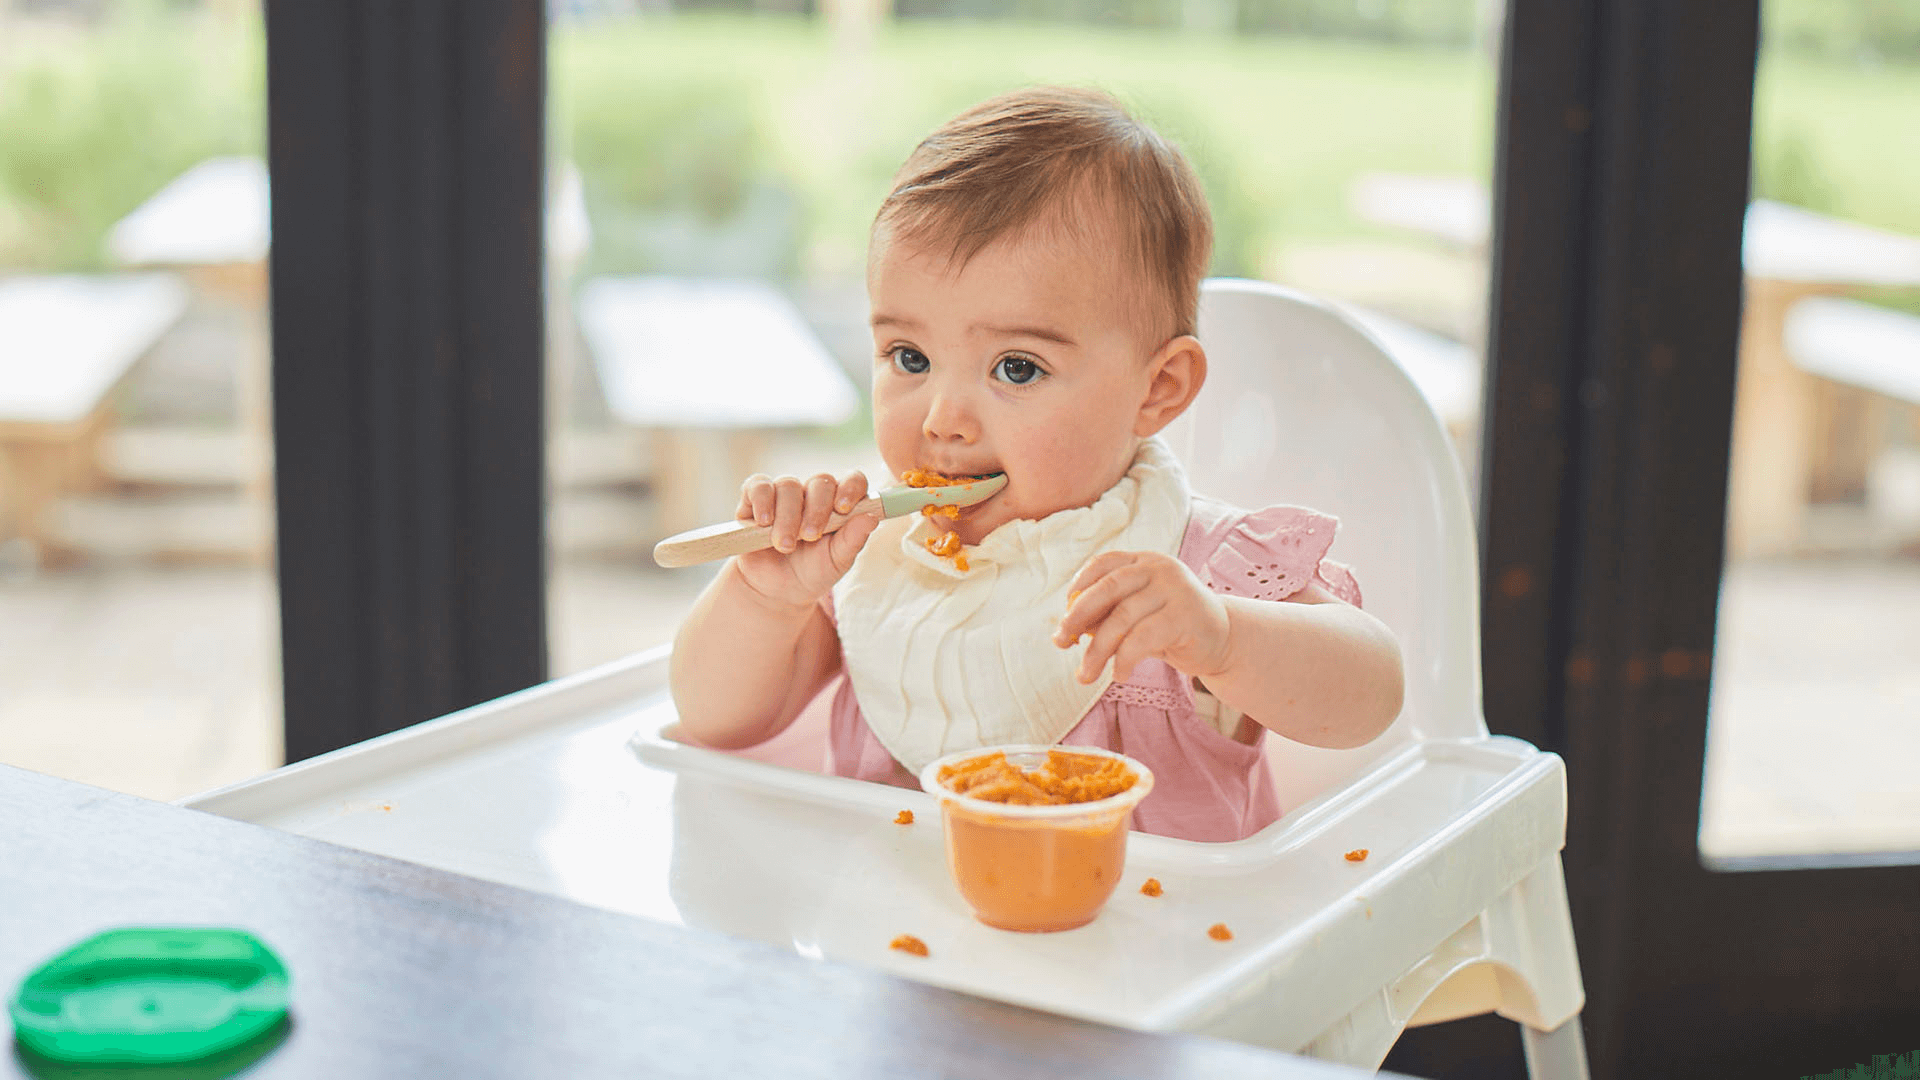 Baby on a highchair with a bib on feeding themselves from an Organix meal pot